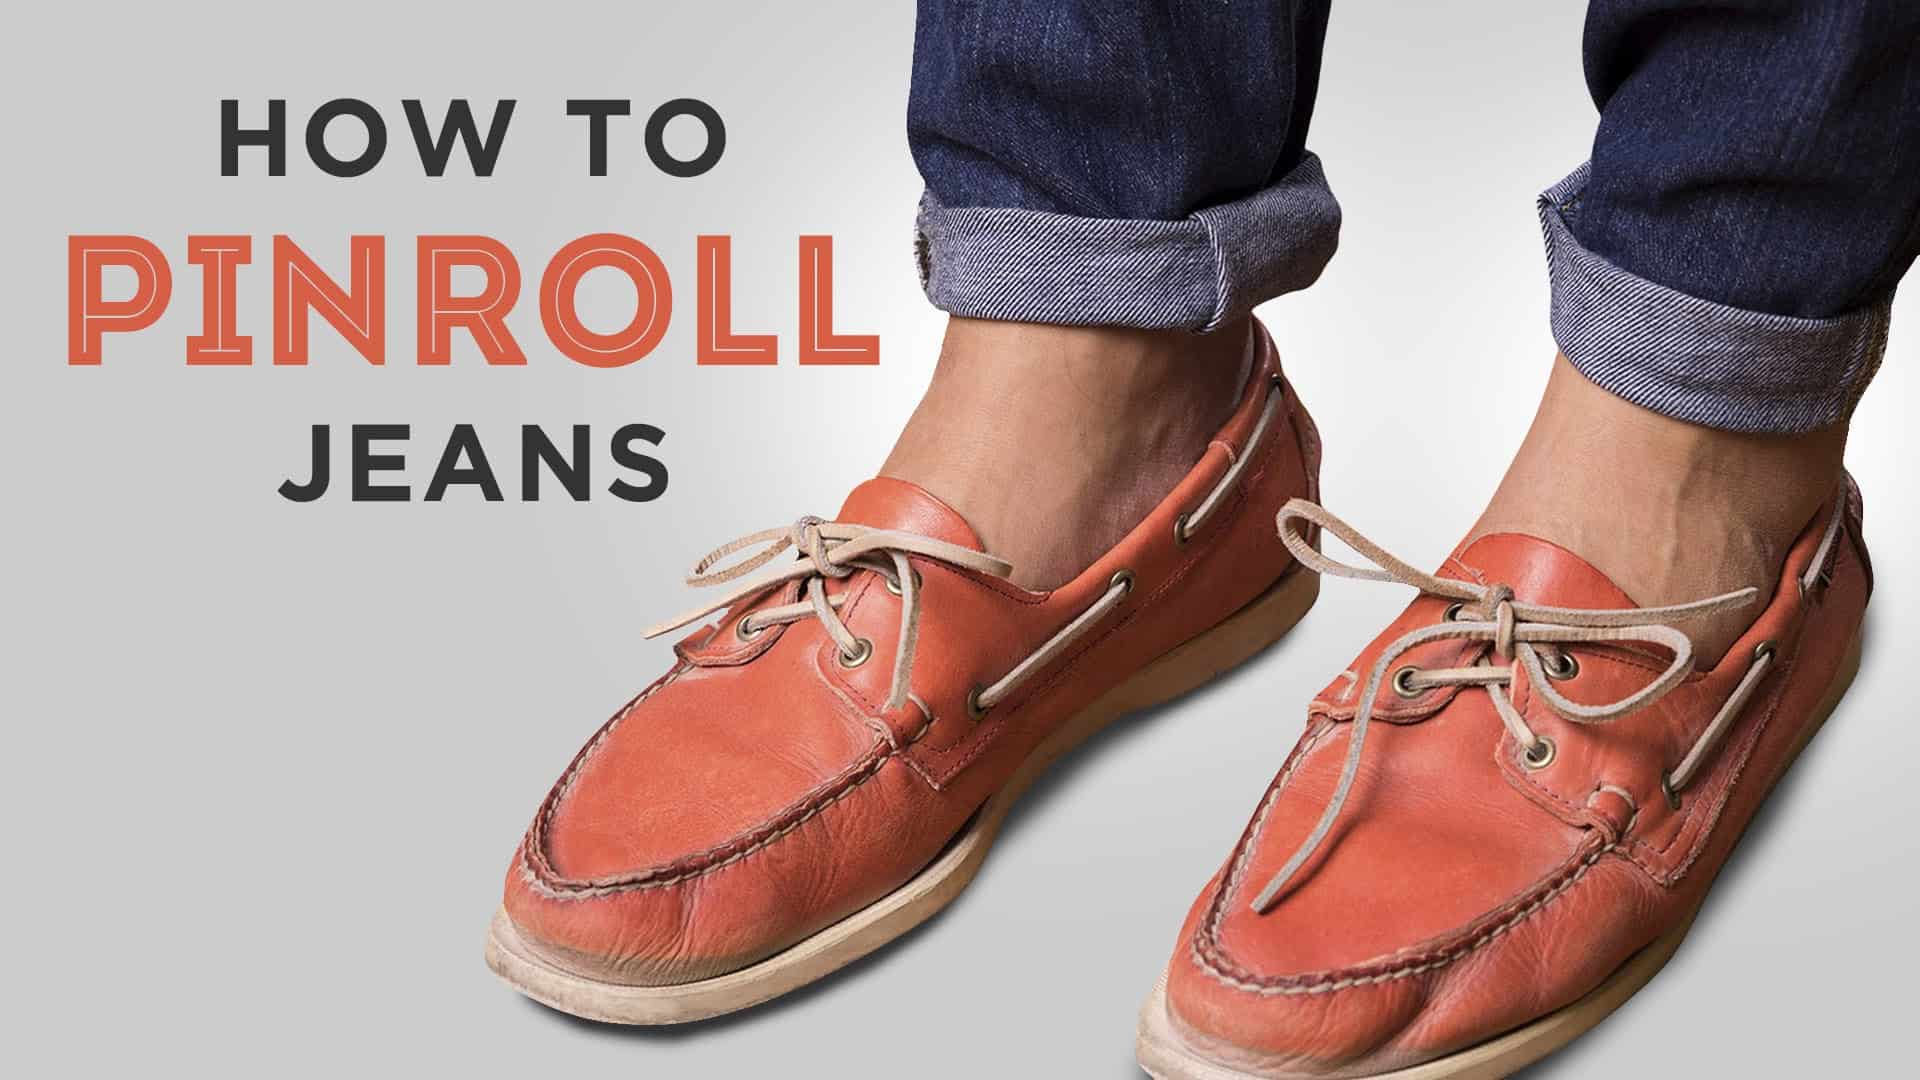 How To Pinroll Your Jeans Properly  FashionBeans